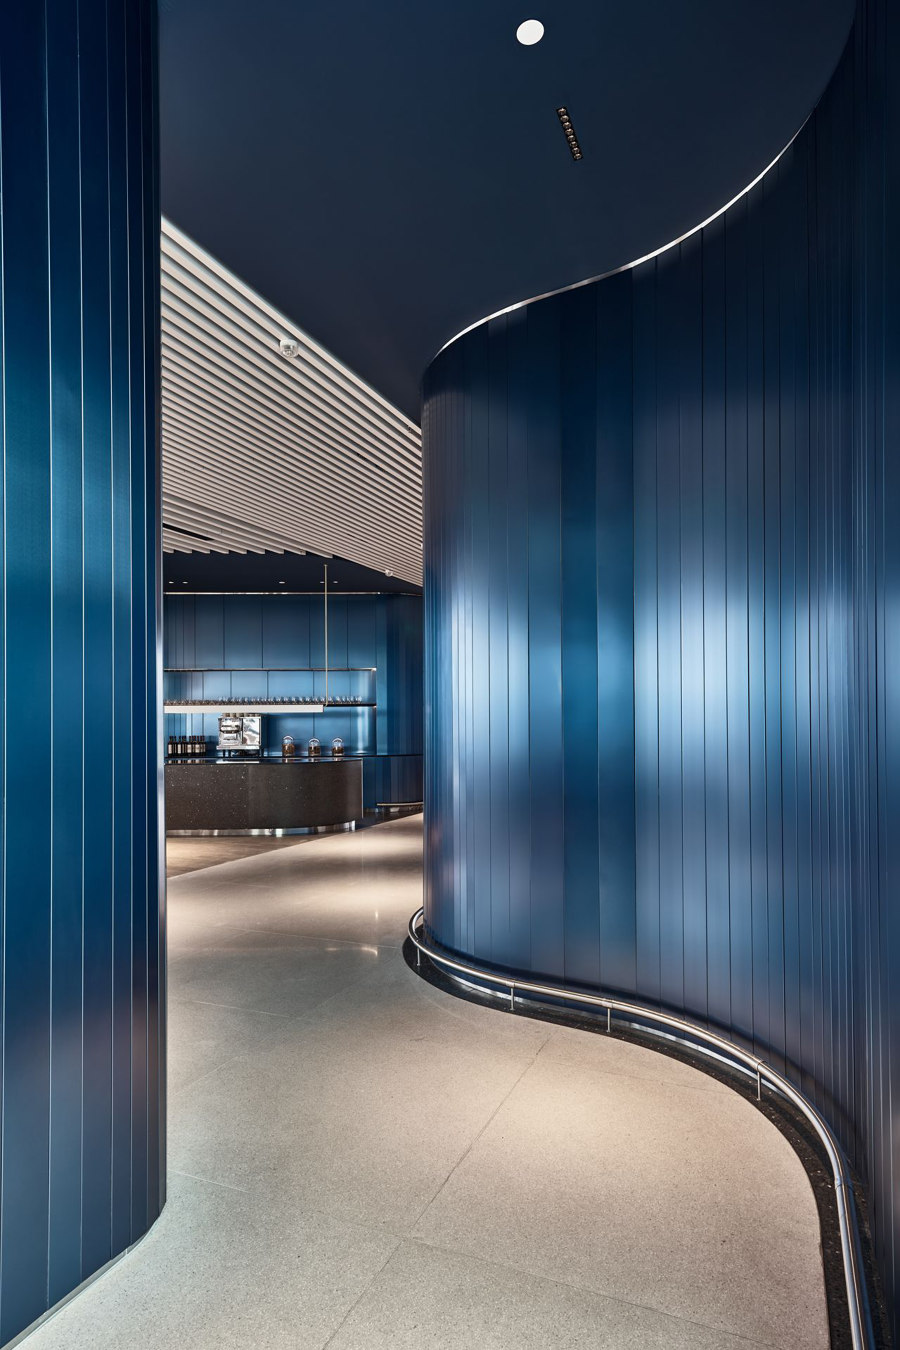 Aegean Business Lounge - AIA by Twelve Concept | Manufacturer references